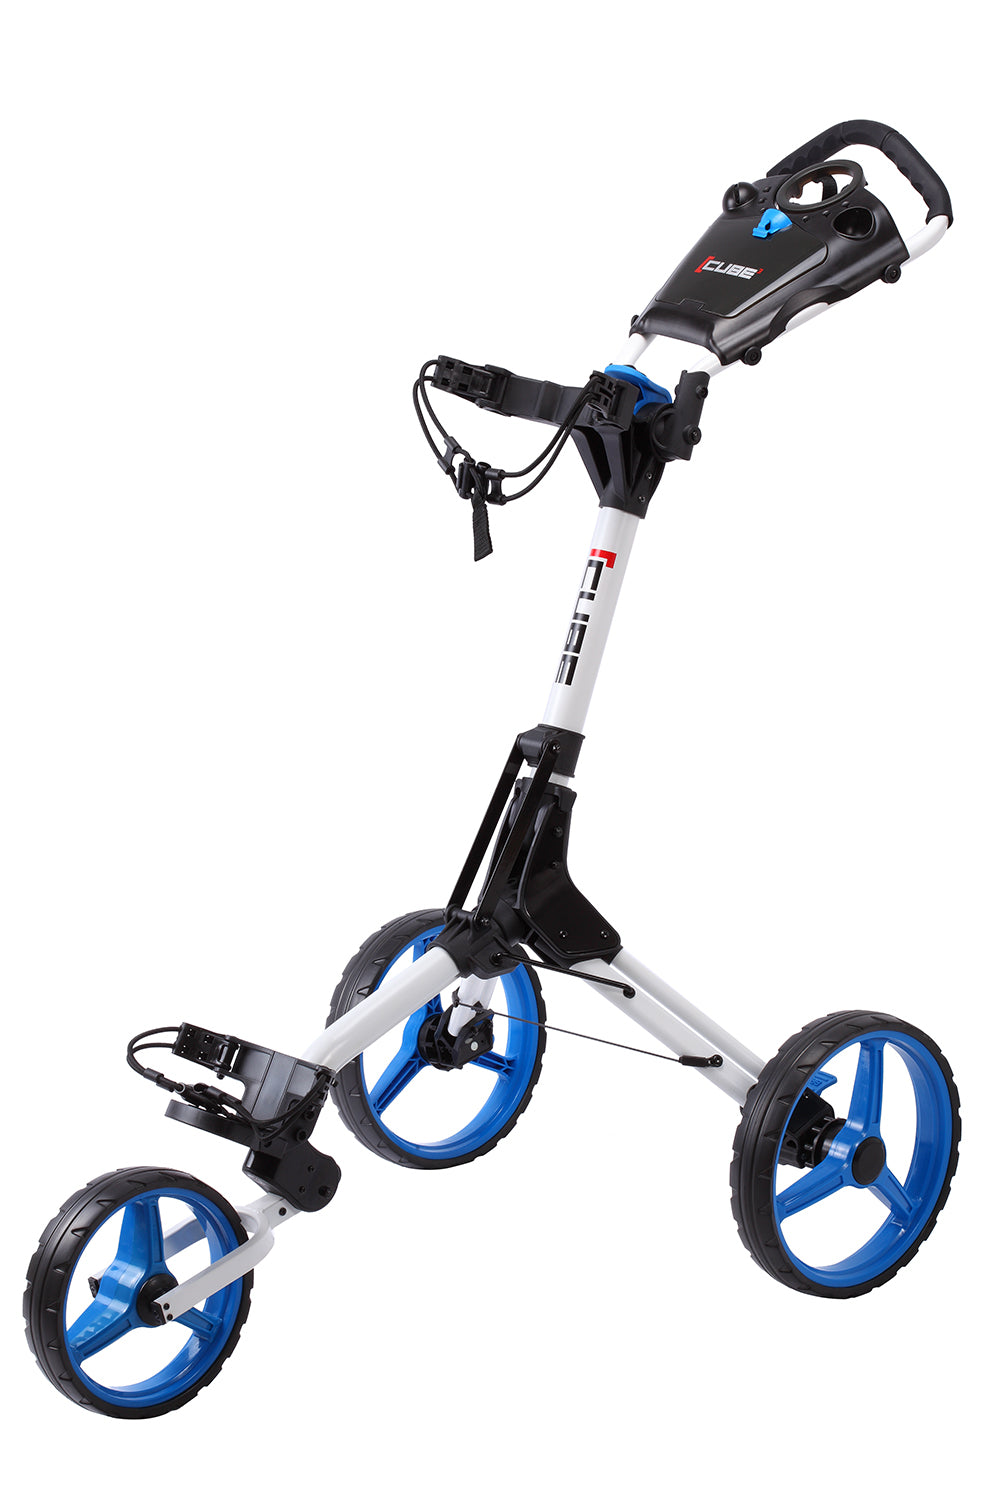 Cube 3.0 3 Wheeled Golf Trolley + Free Gifts White/Blue  